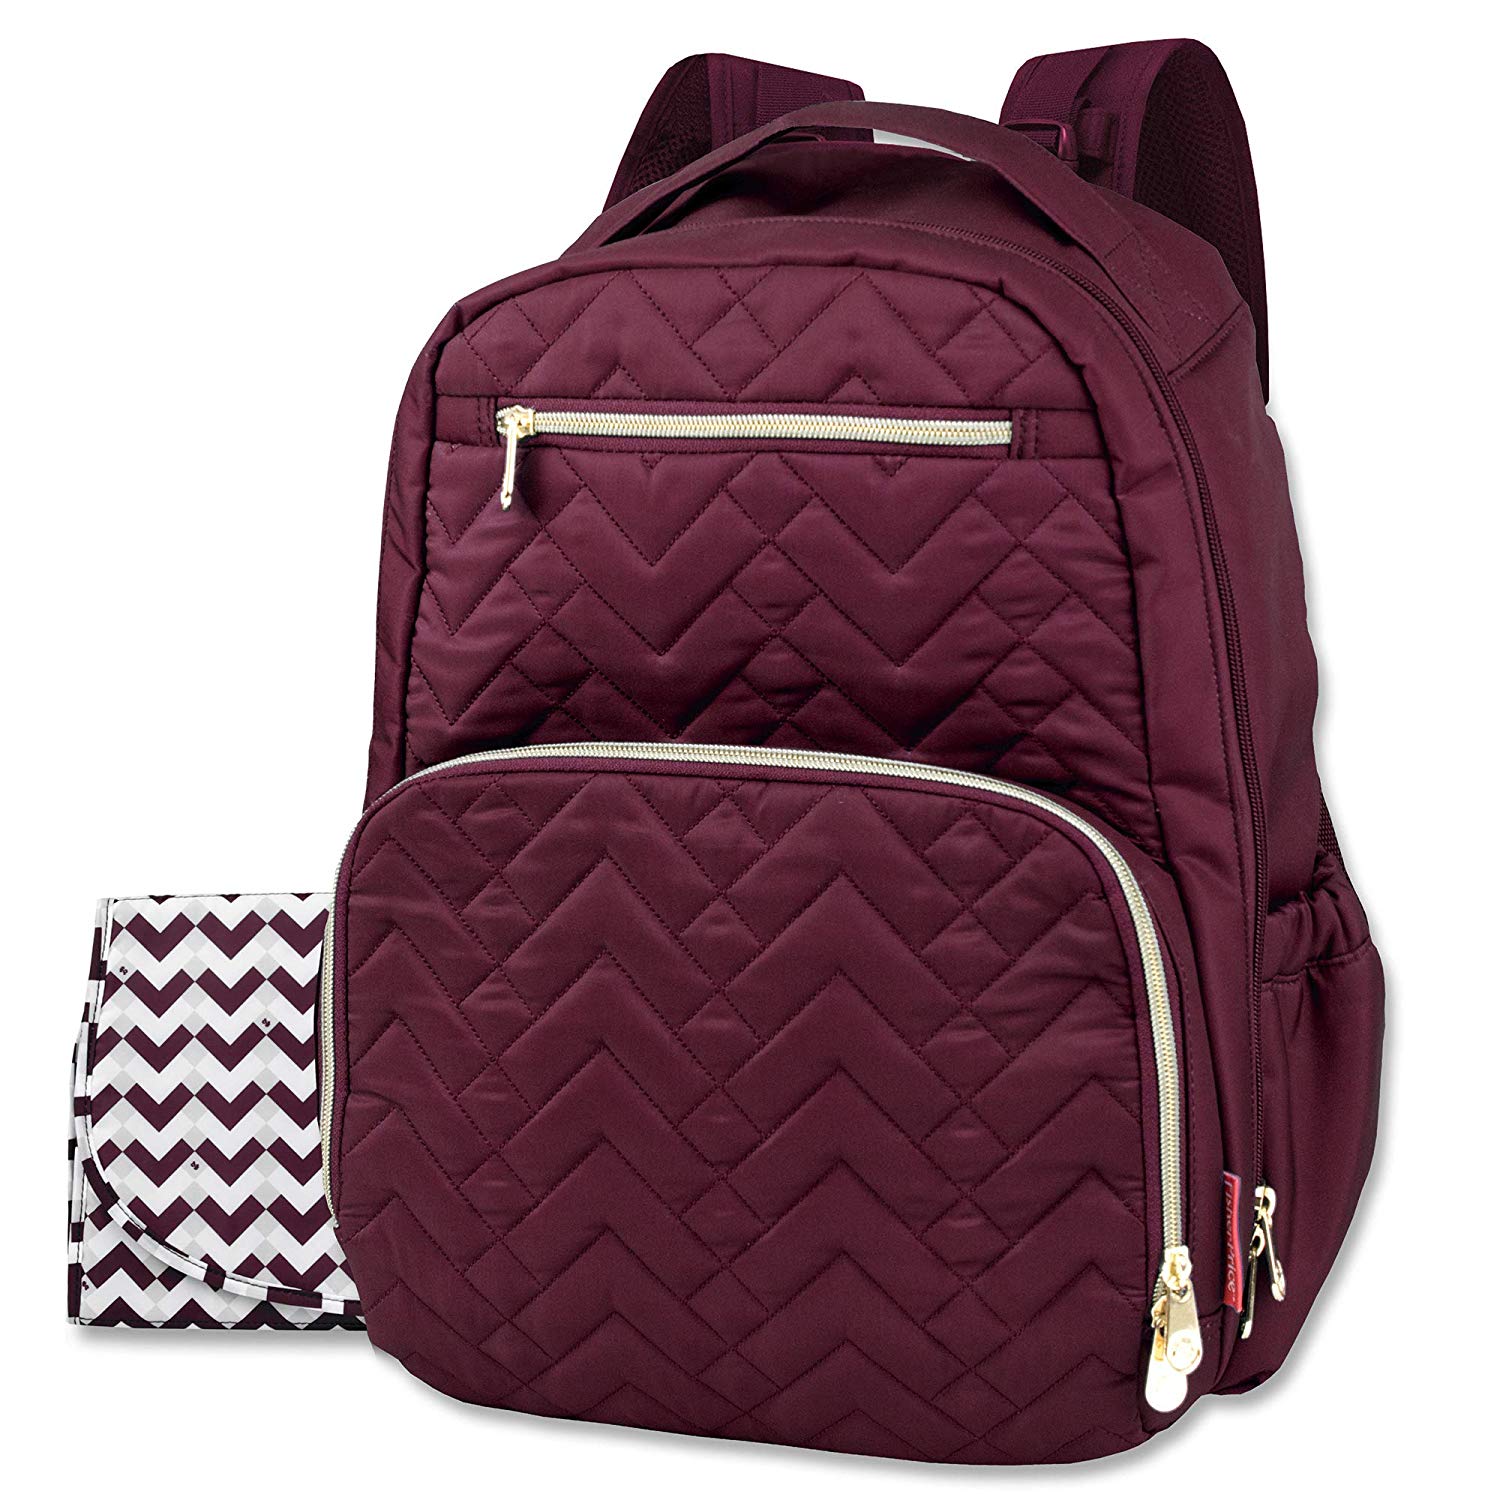 acbags.com Diaper Bag Backpack - Signature Collection, with Cell Phone and Tablet Pockets